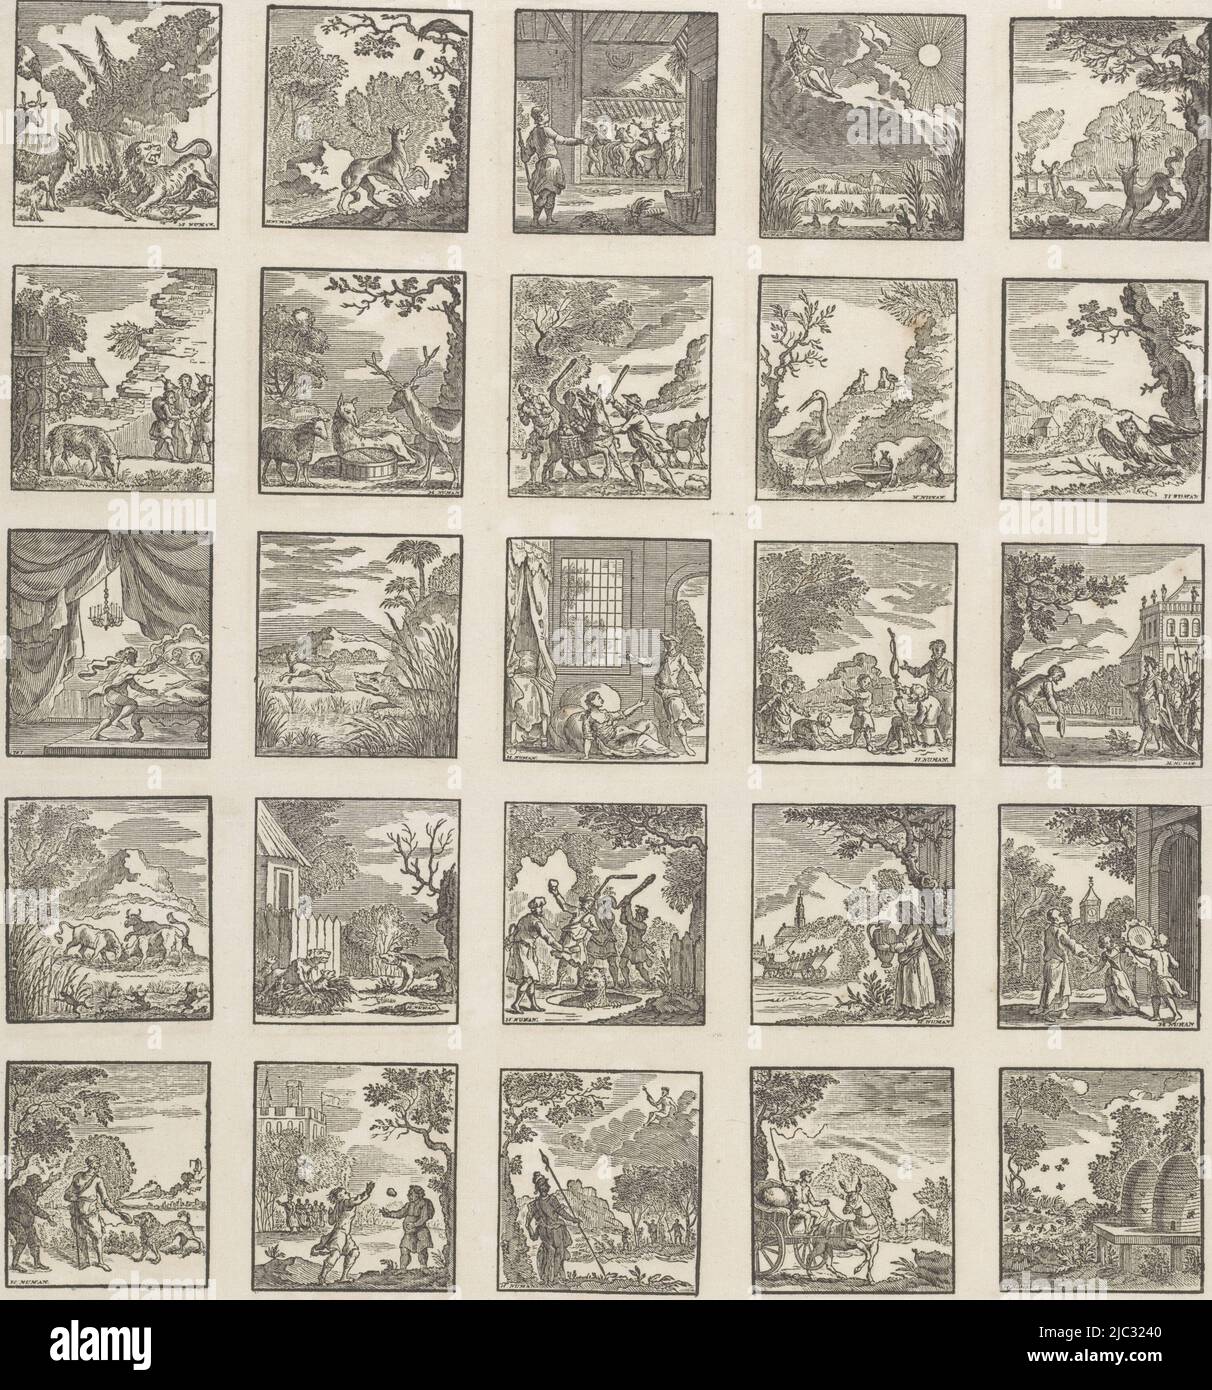 Sheet with thirty representations of stories from the Aesopus Fables, including the fable of the fox and the raven, the fable of the fox and the stork, the fable of the girl and the jug of milk and the fable of the wolf and the crane, Images from the Aesopus Fables, print maker: Hendrik Numan, (mentioned on object), Haarlem, 1783, paper, h 472 mm × w 371 mm Stock Photo